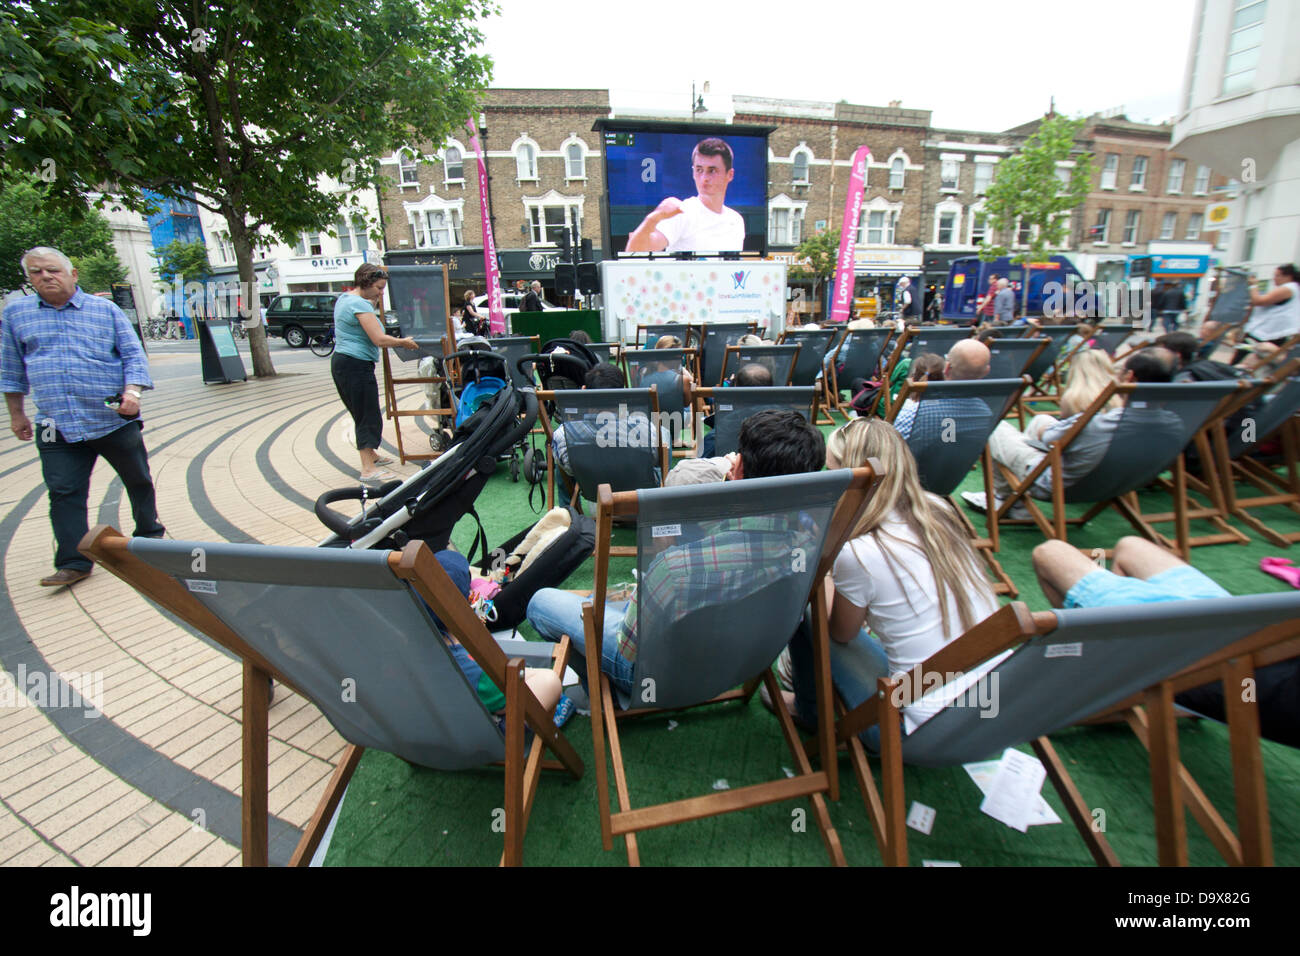 Wimbledon, London, UK. 27th June 2013.  Shoppers and members of the public enjoy watching live matches broadcast on  a giant electronic screen in  Wimbledon town centre. Credit:  amer ghazzal/Alamy Live News Stock Photo